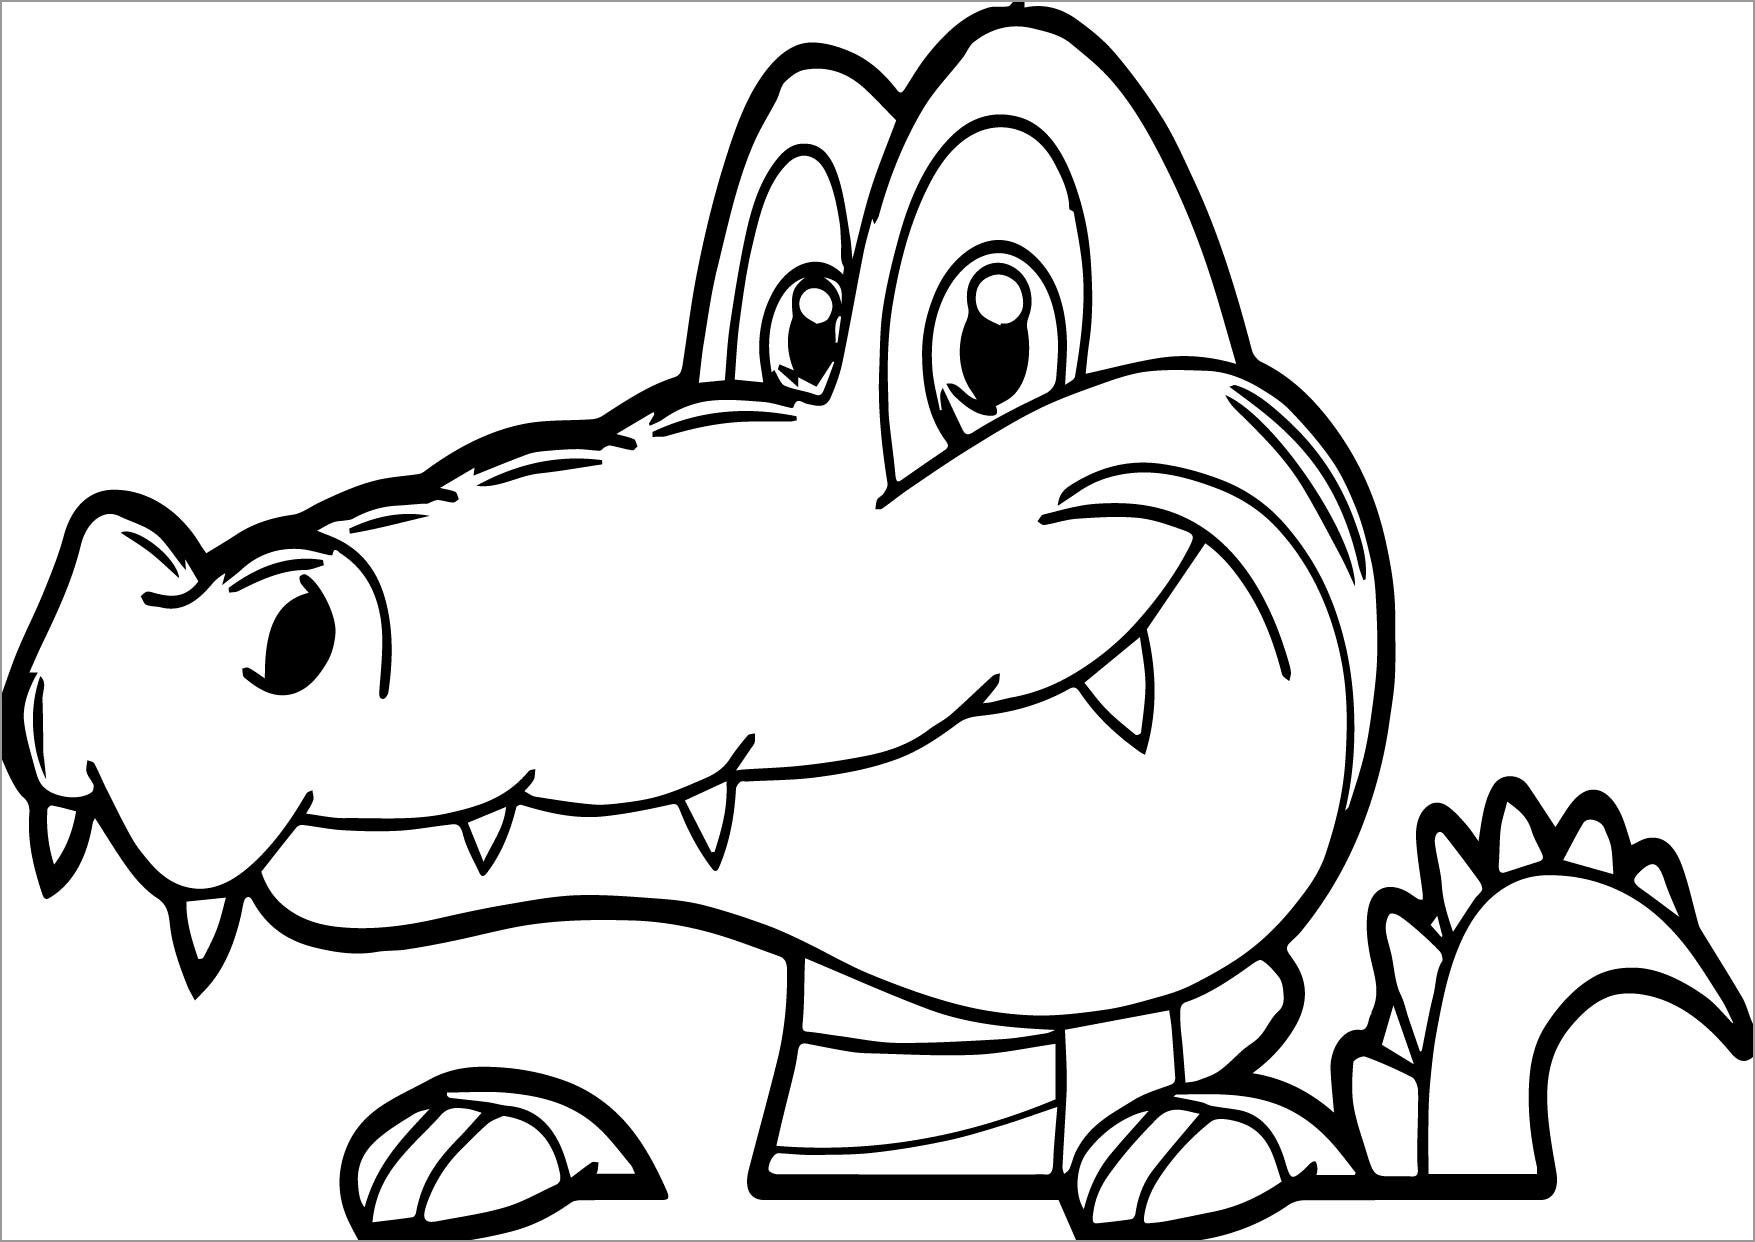 crocodile-coloring-pages-coloringbay